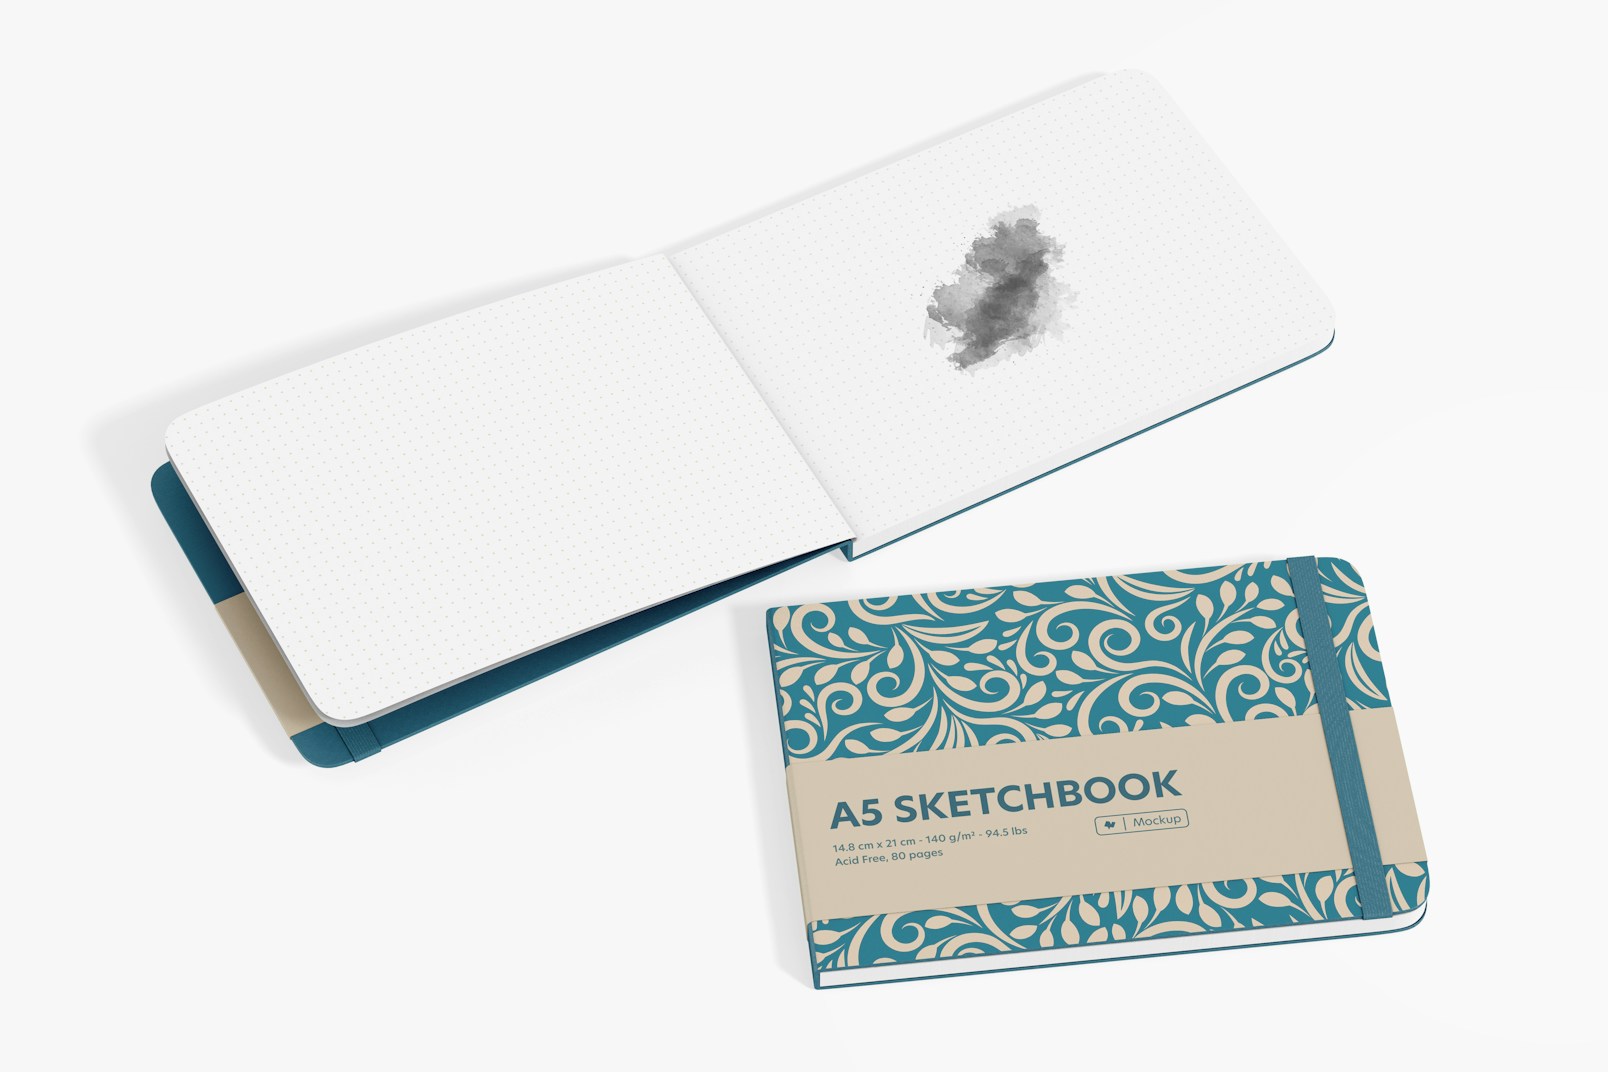 A5 Skecthbook Mockup, Opened and Closed